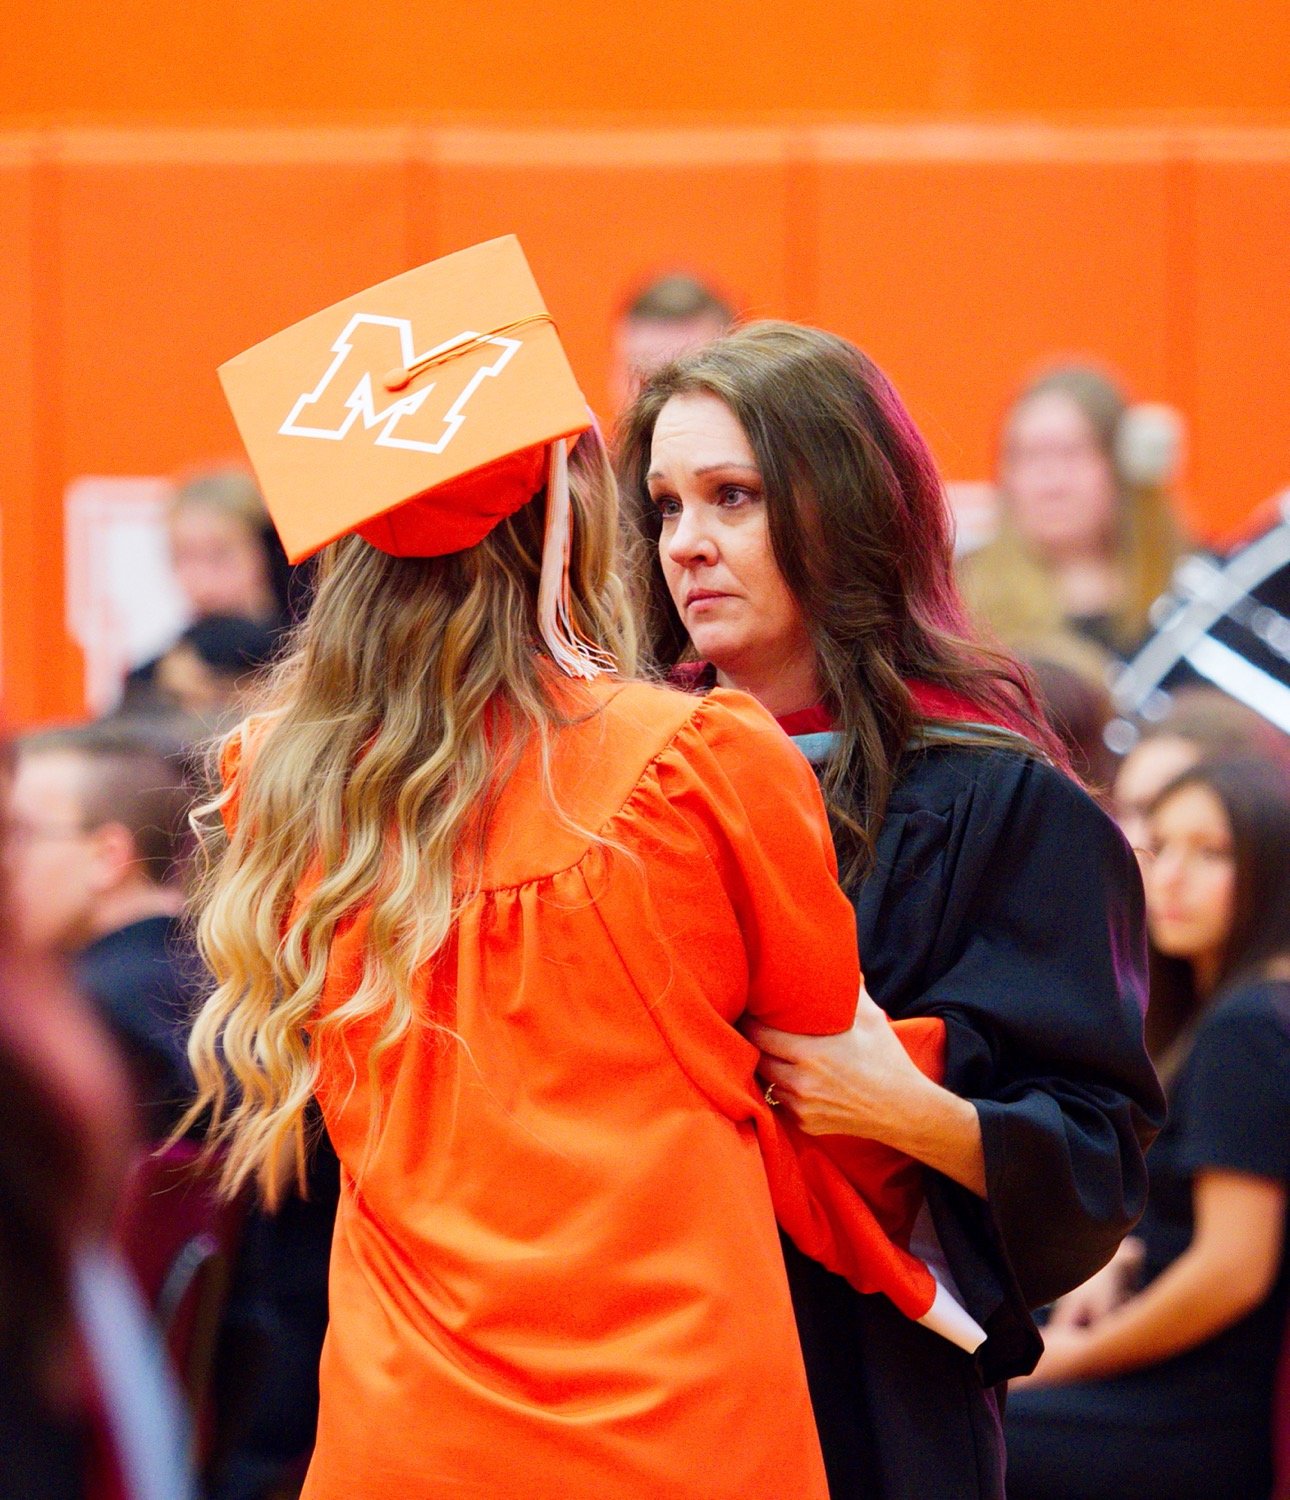 Hannah Zoch, shortly after receiving the final diploma of the evening, is embraced by counselor Melisia Foster. [observe more orange, get grad gifts]